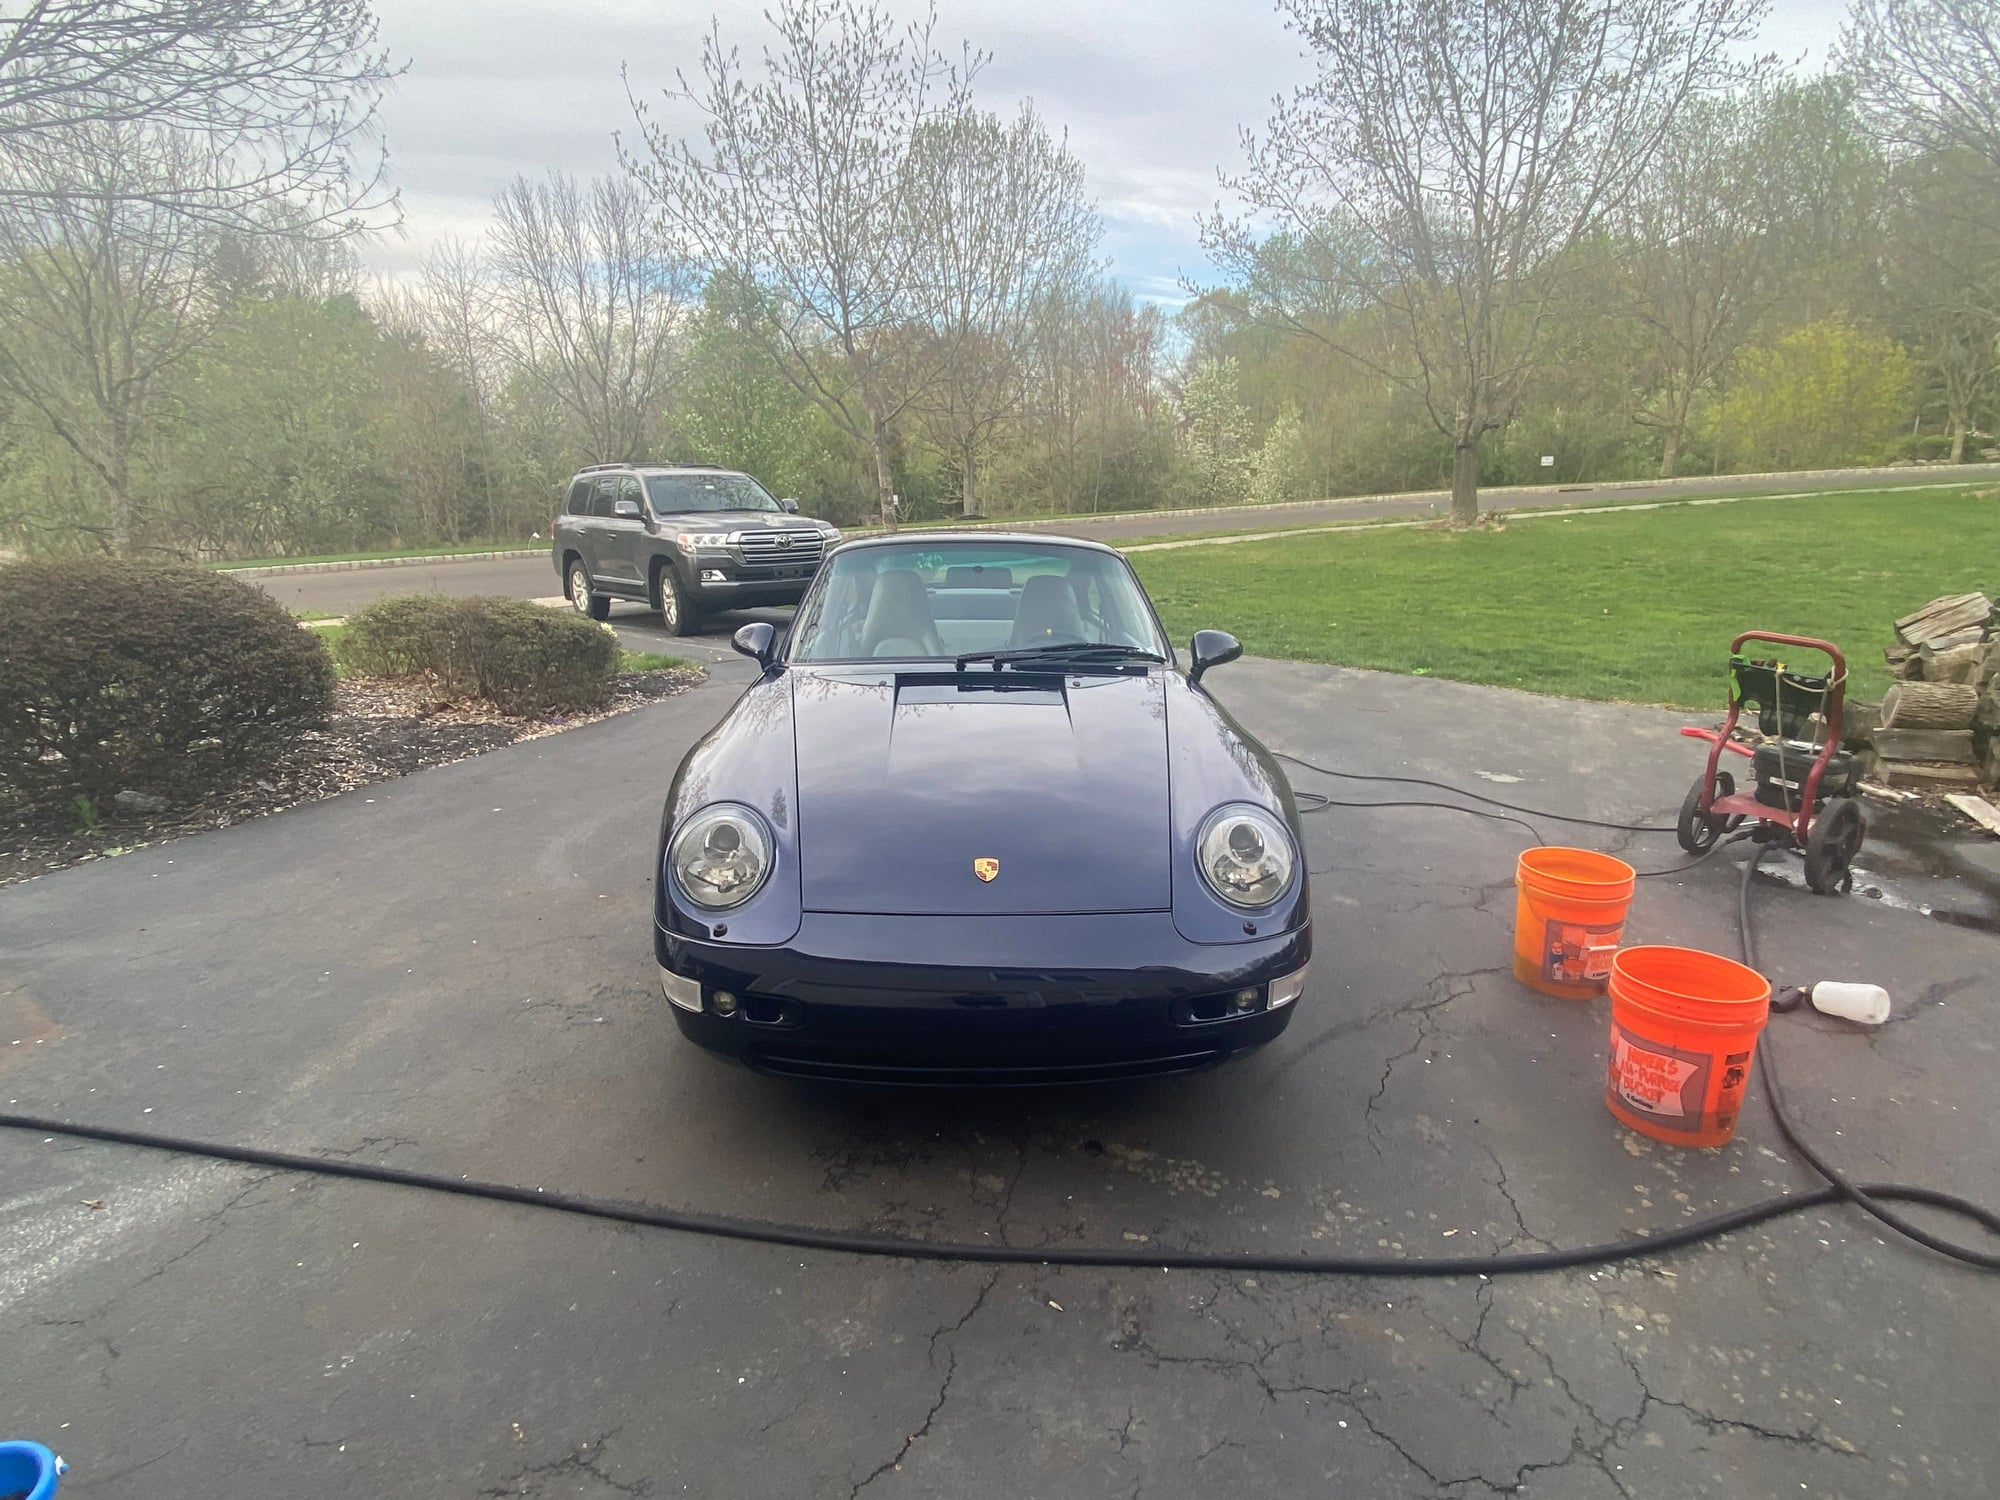 1995 Porsche 911 - 1995 993 6 speed 42k miles - Used - VIN Wpoaa2994ss322646 - 42,000 Miles - 6 cyl - 2WD - Manual - Coupe - Blue - Doylestown, PA 18902, United States